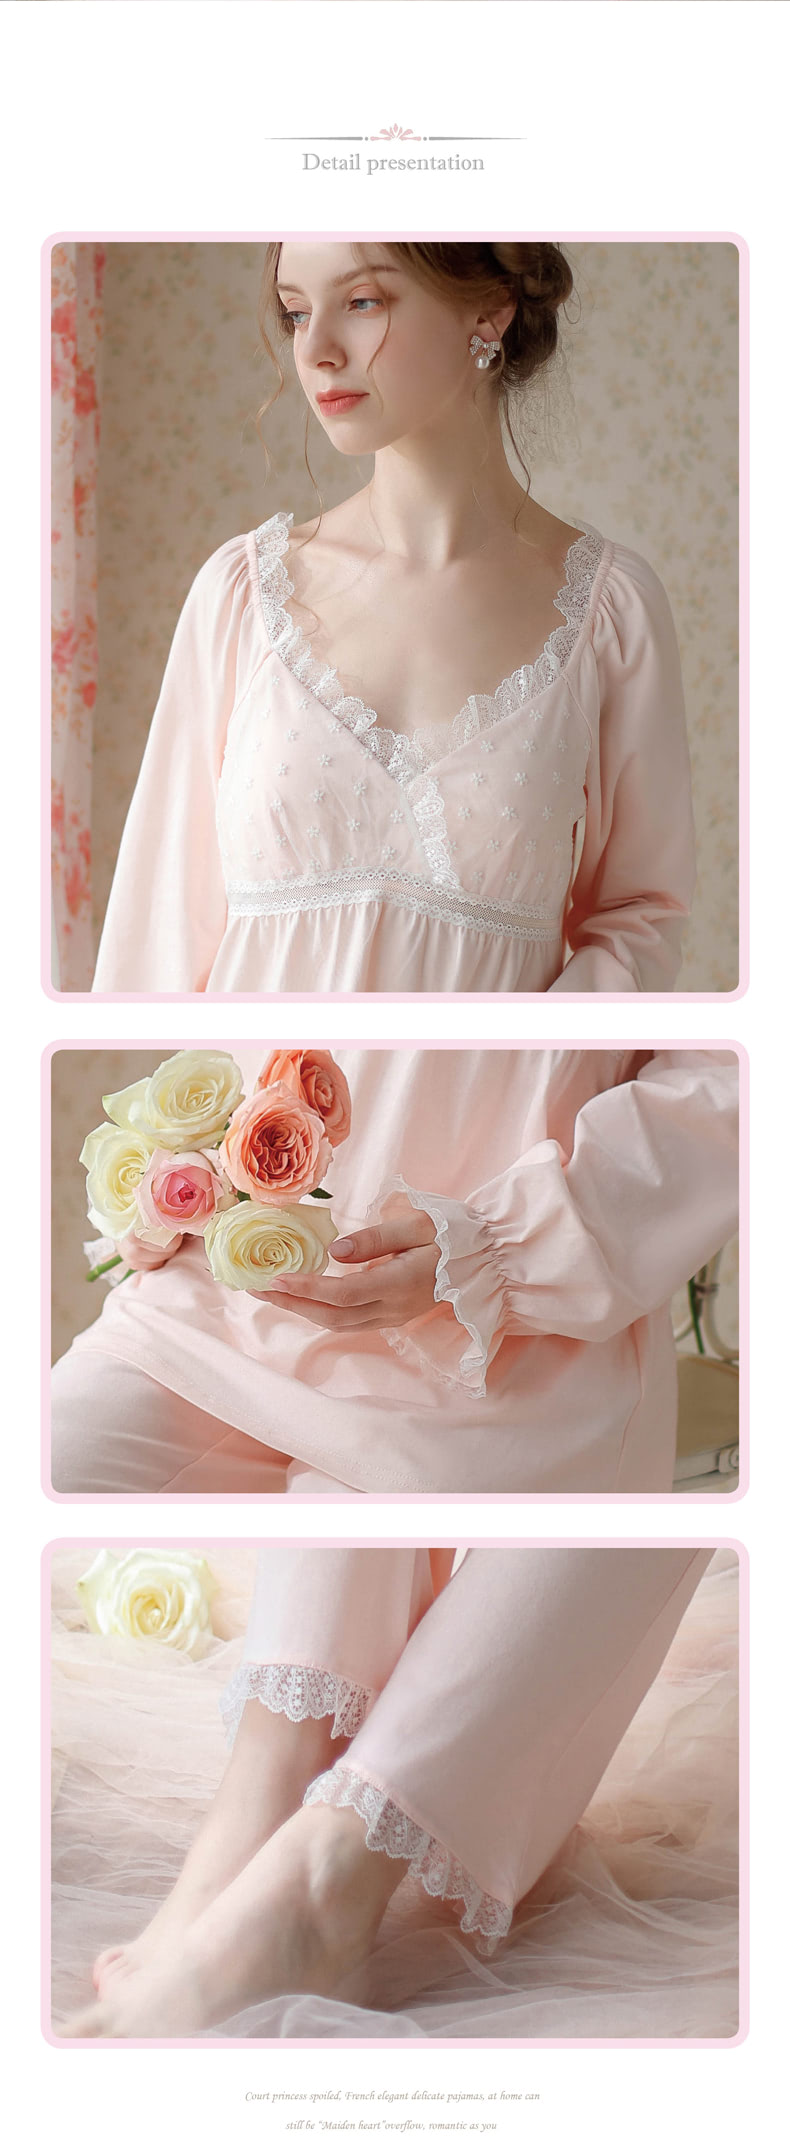 Vintage-Sweet-Cotton-Long-Sleeve-Home-Casual-Clothes-Set19.jpg